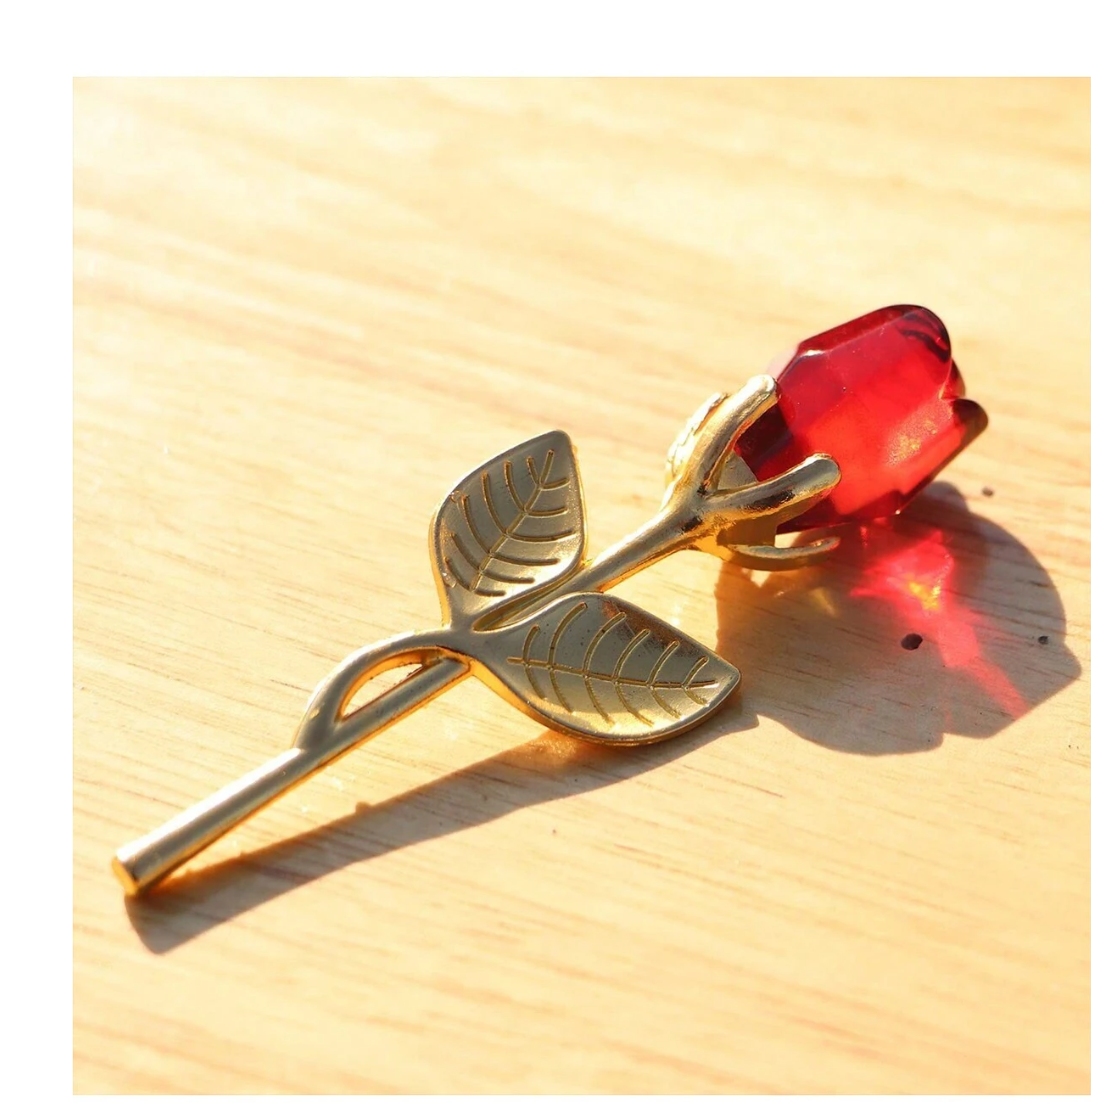 Captivating Elegance: Red Glass Rose Mini Crystal - A Radiant Gift for Weddings, Parties, and Valentine's Day with Exquisite Gift Packaging!